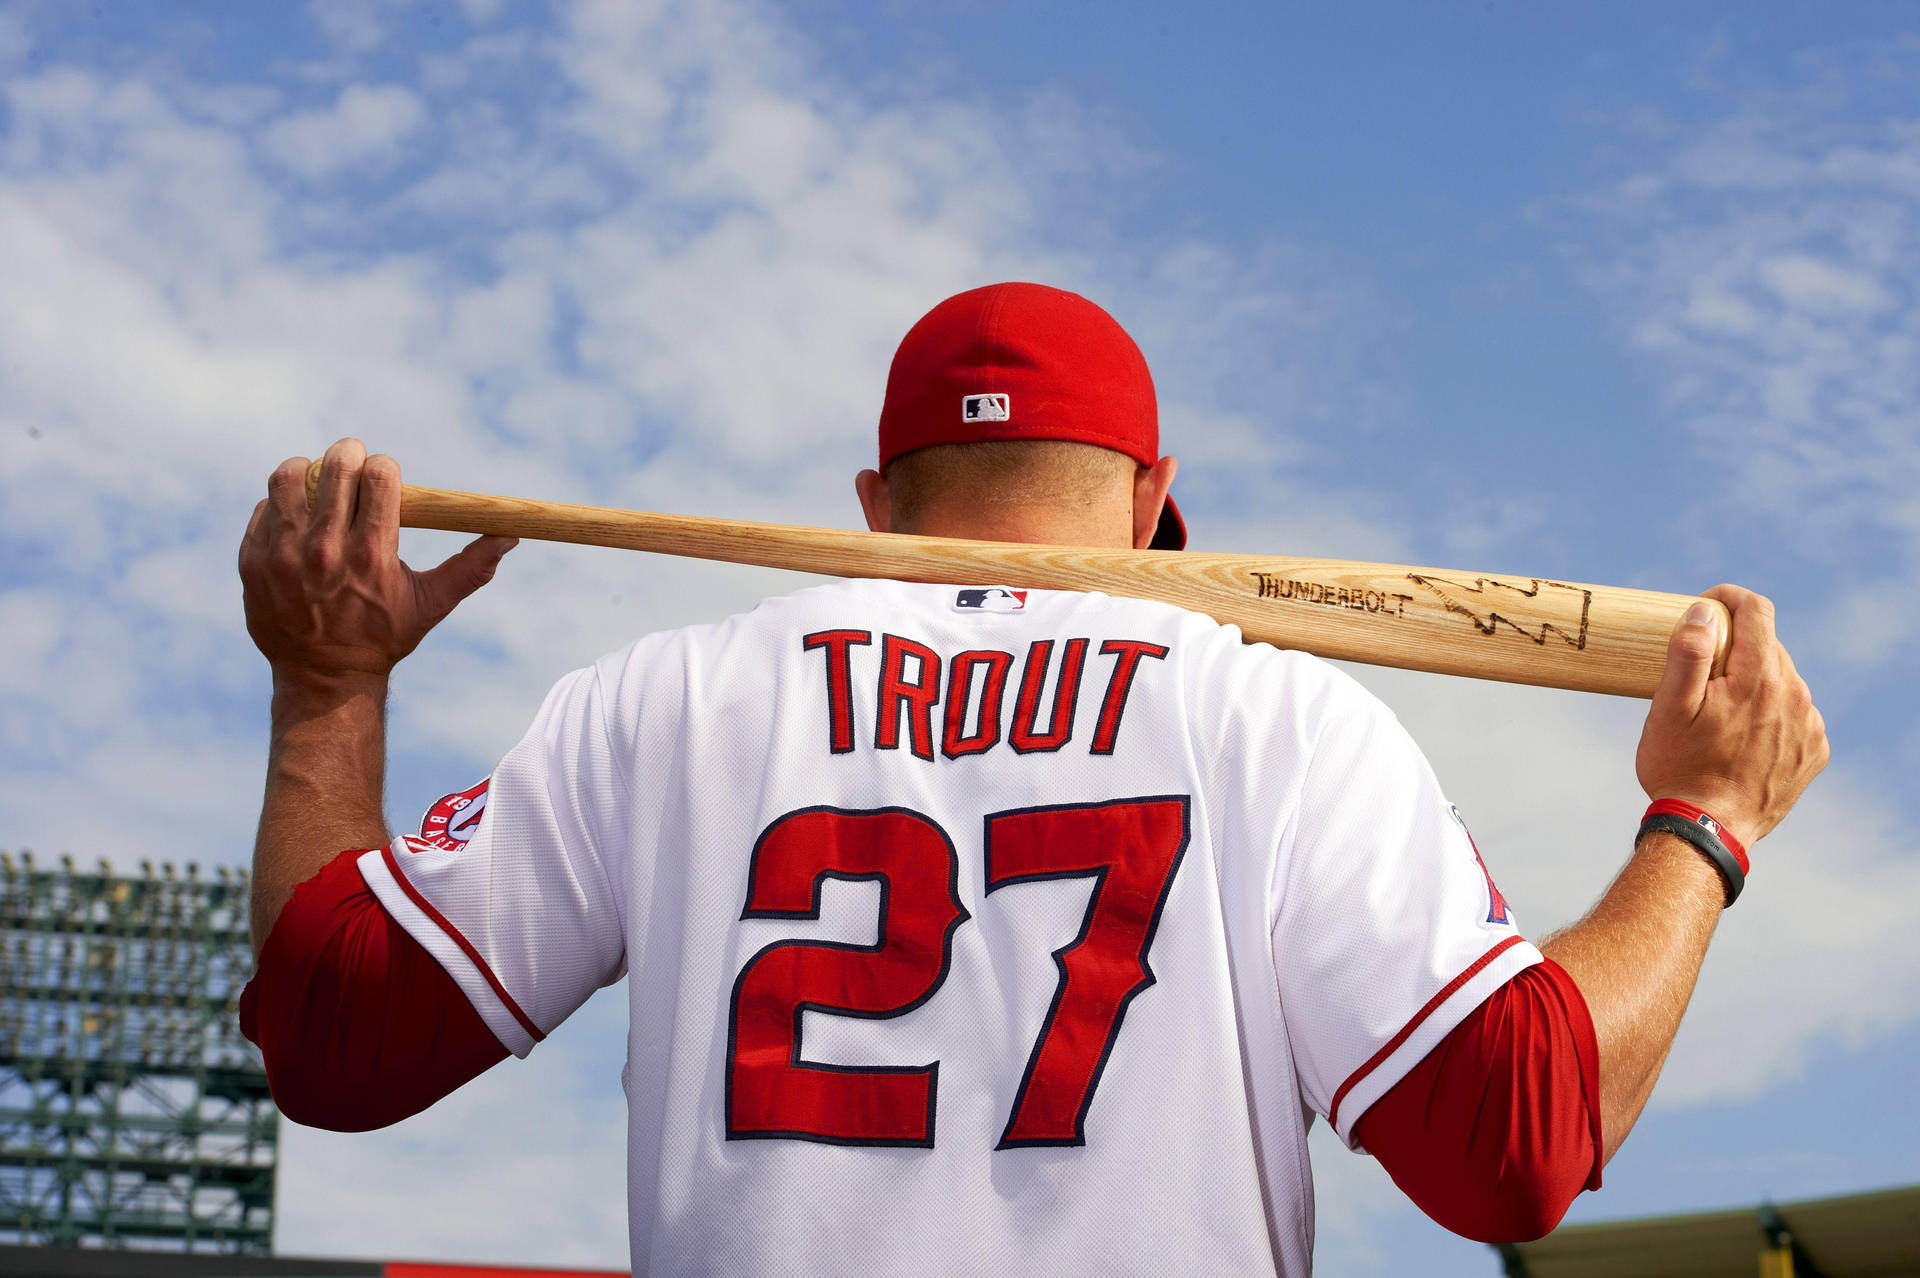 American Baseball Player Mike Trout